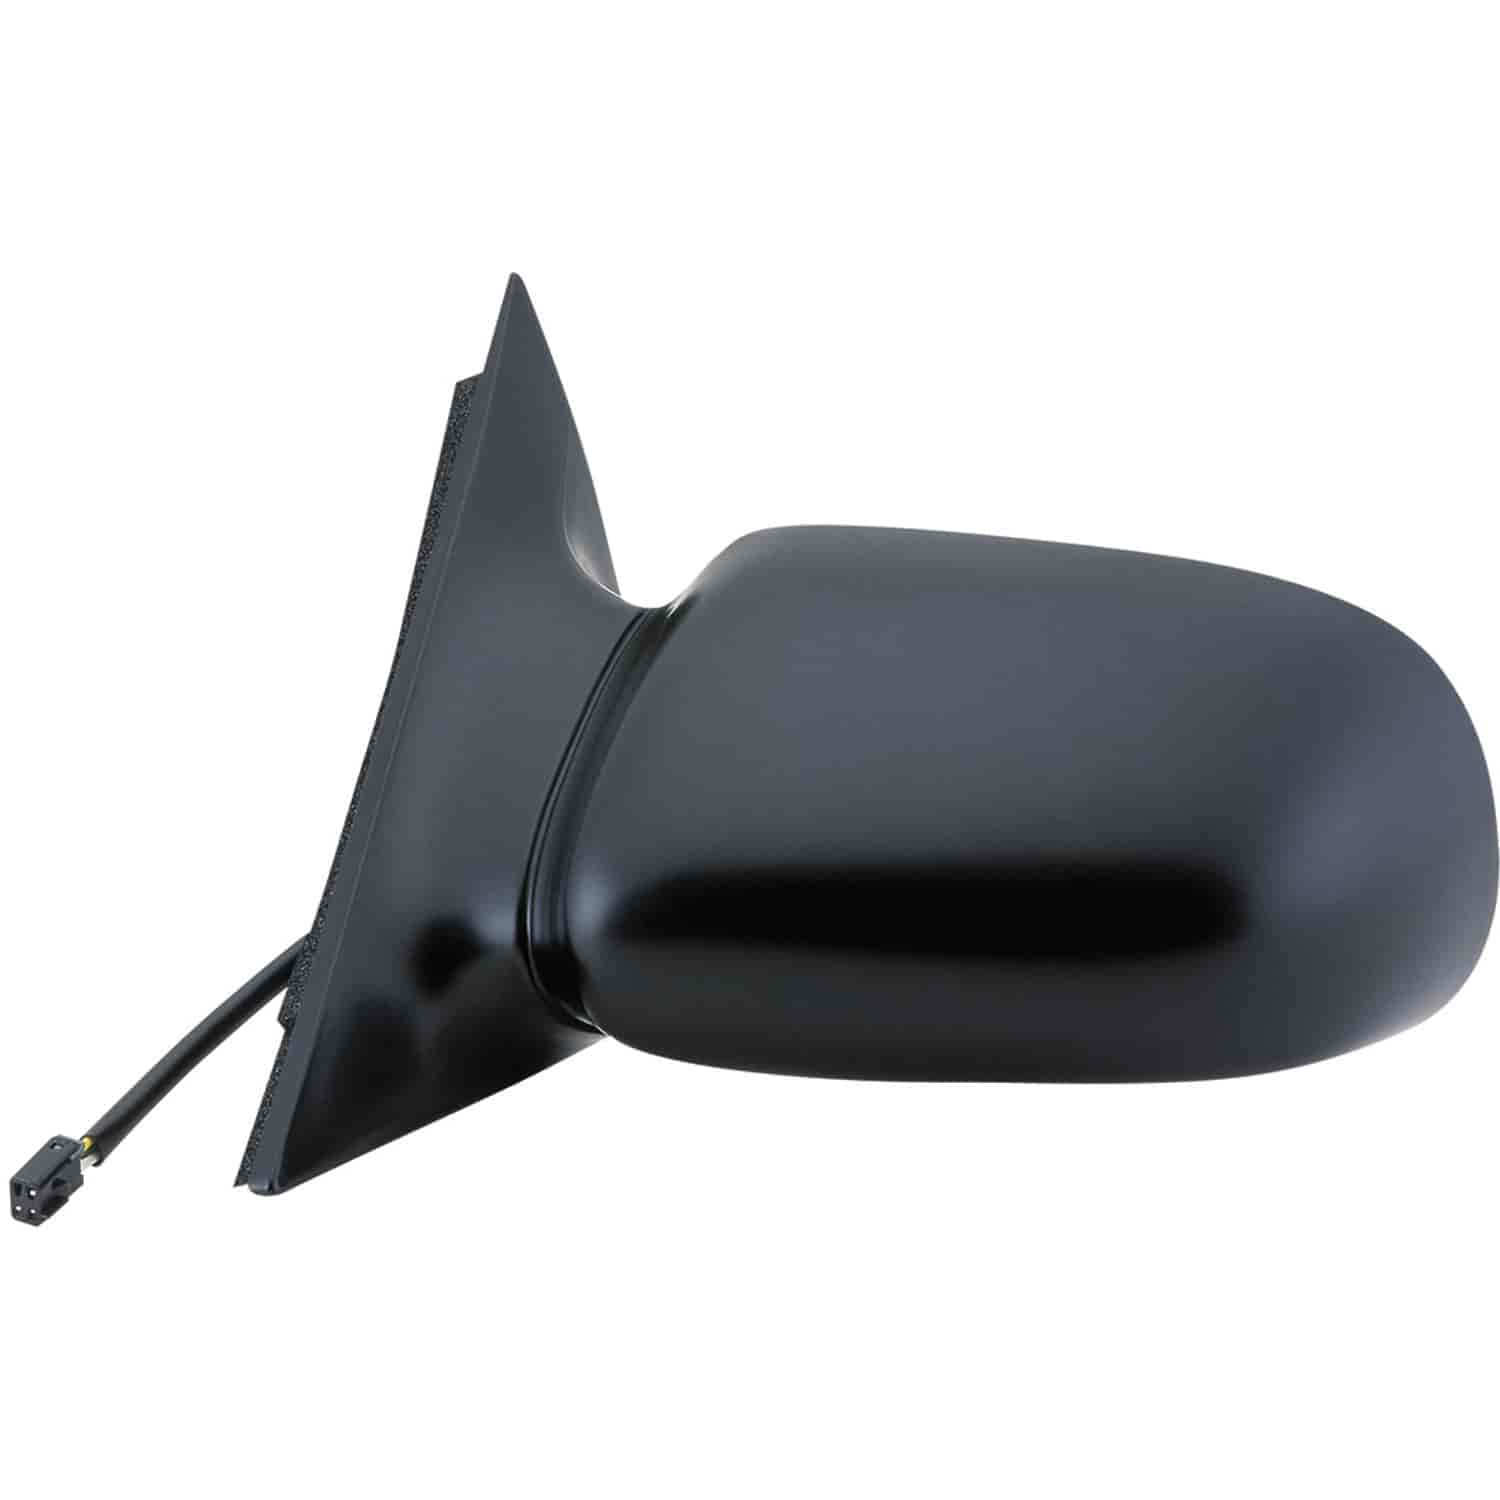 OEM Style Replacement mirror for 92-98 Olds. Achivea driver side mirror tested to fit and function l